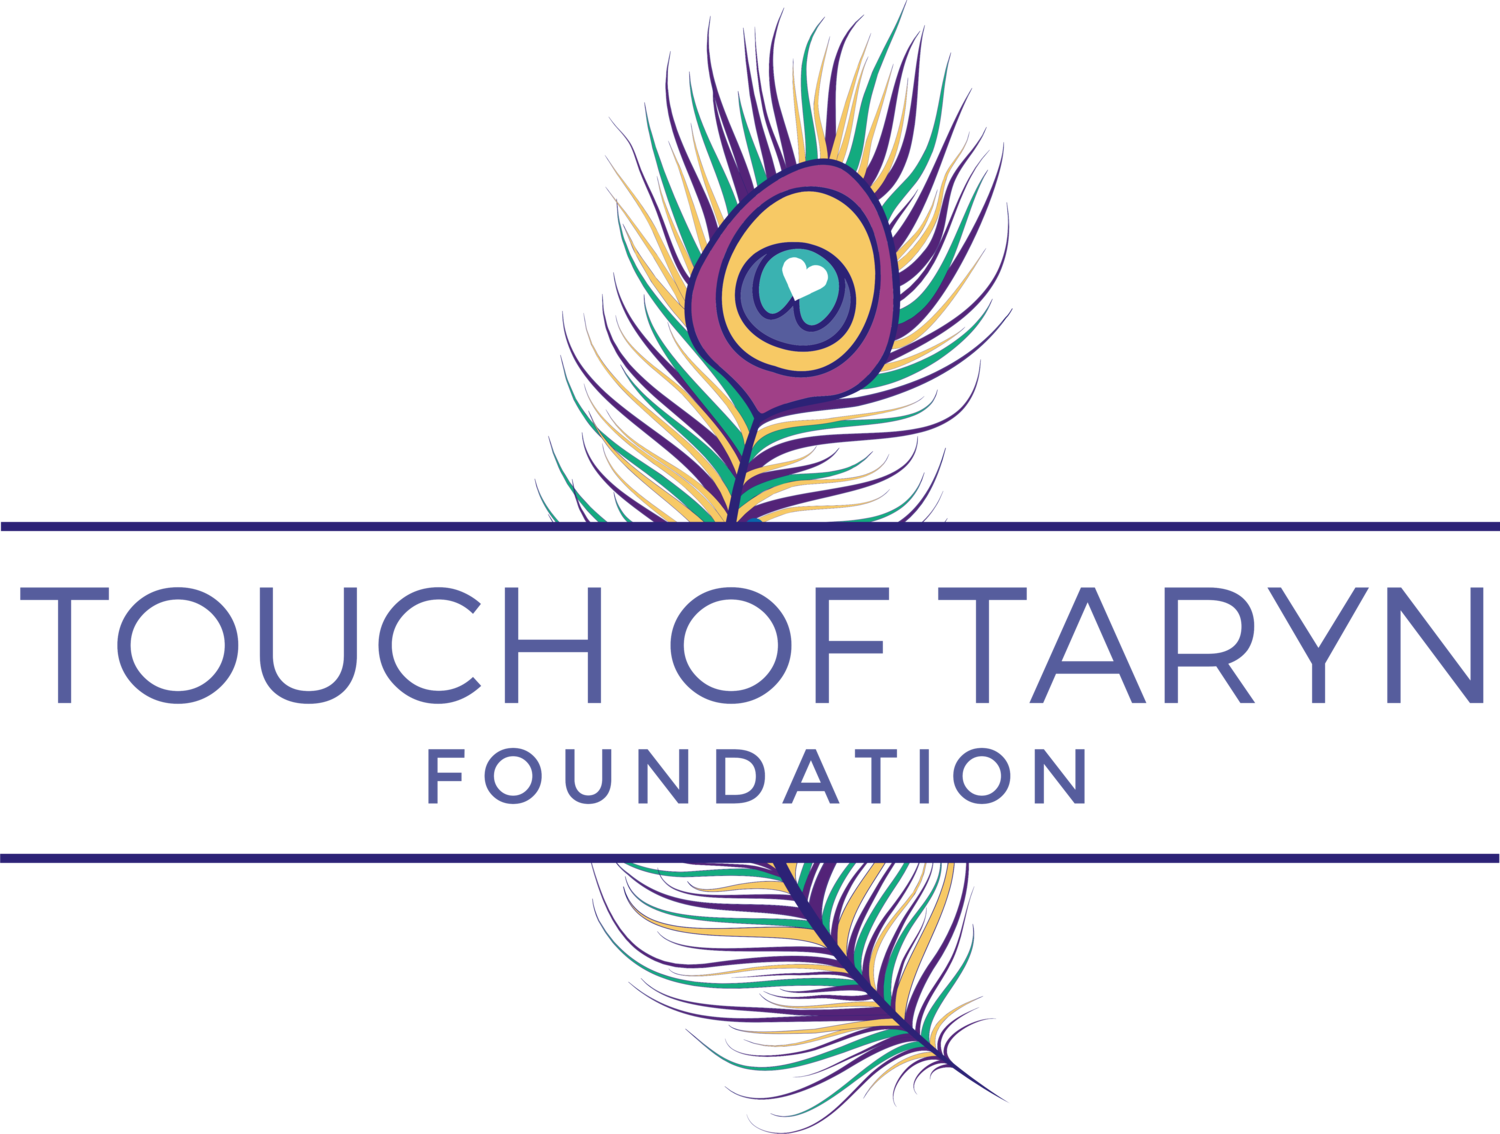 The Touch of Taryn Foundation